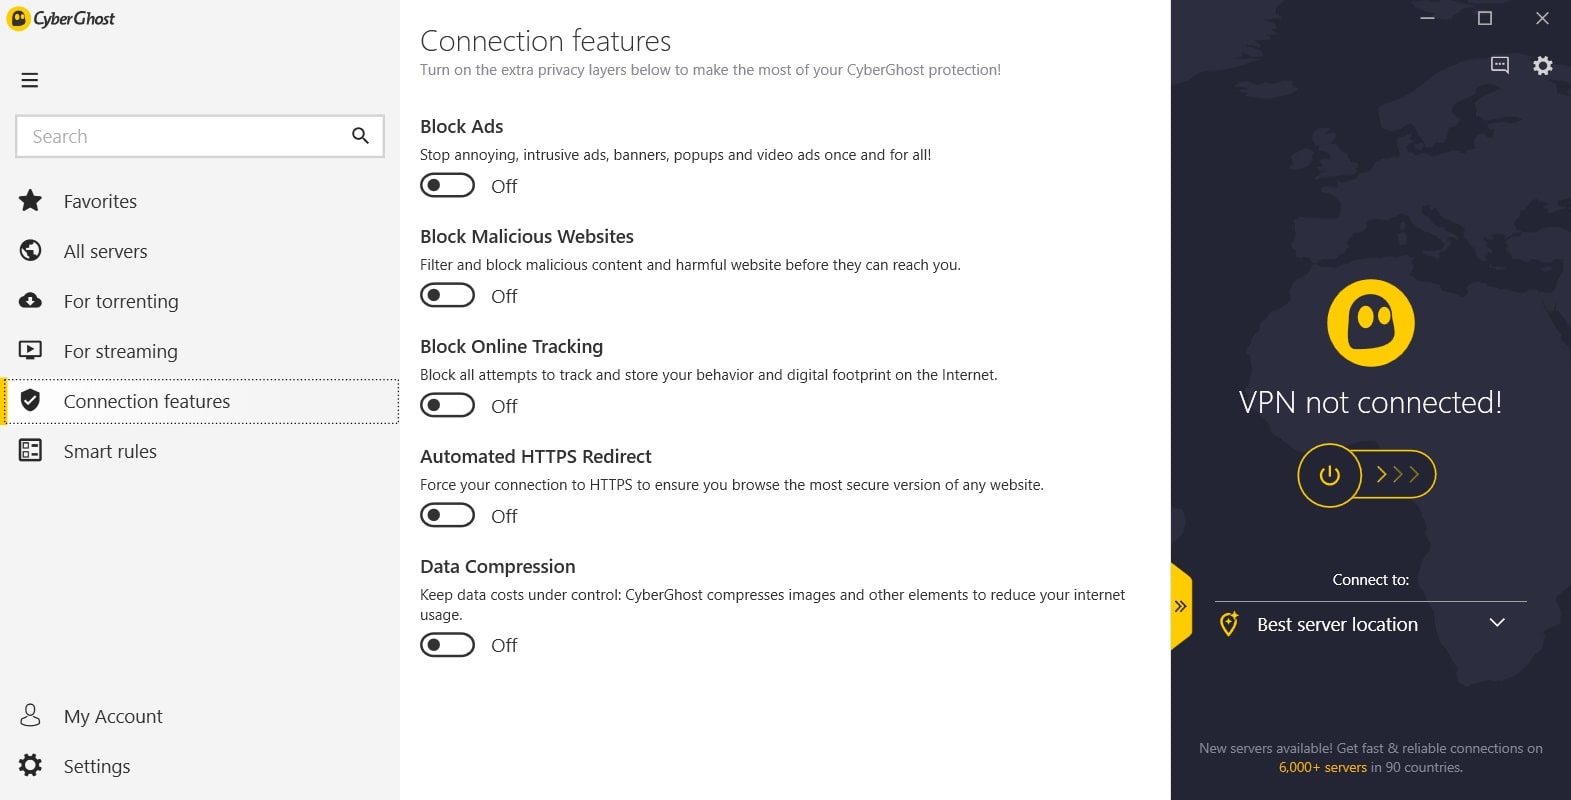 CyberGhost VPN Connection Features